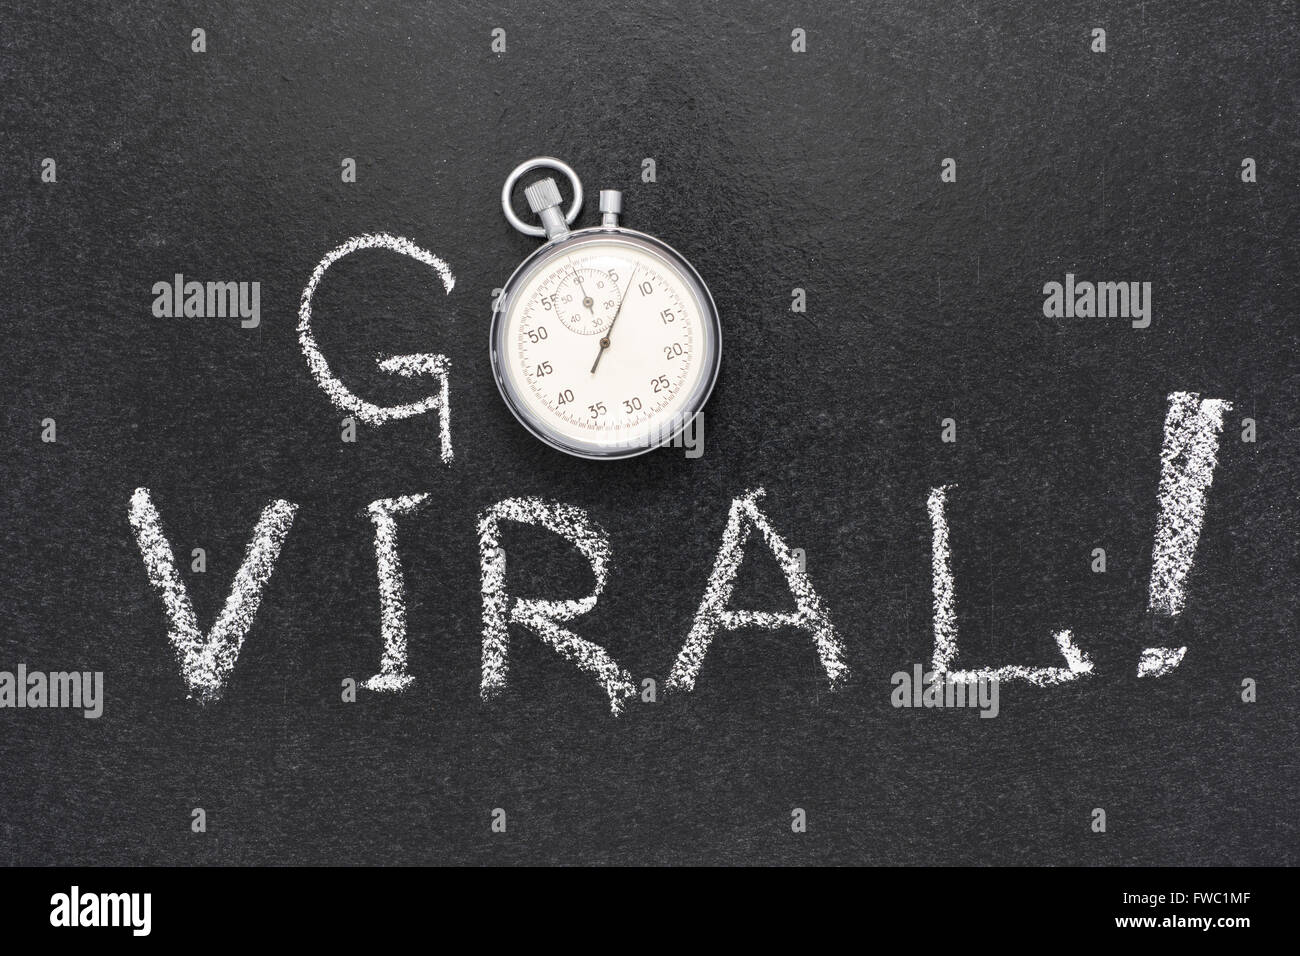 go viral exclamation handwritten on chalkboard with vintage precise stopwatch used instead of O Stock Photo